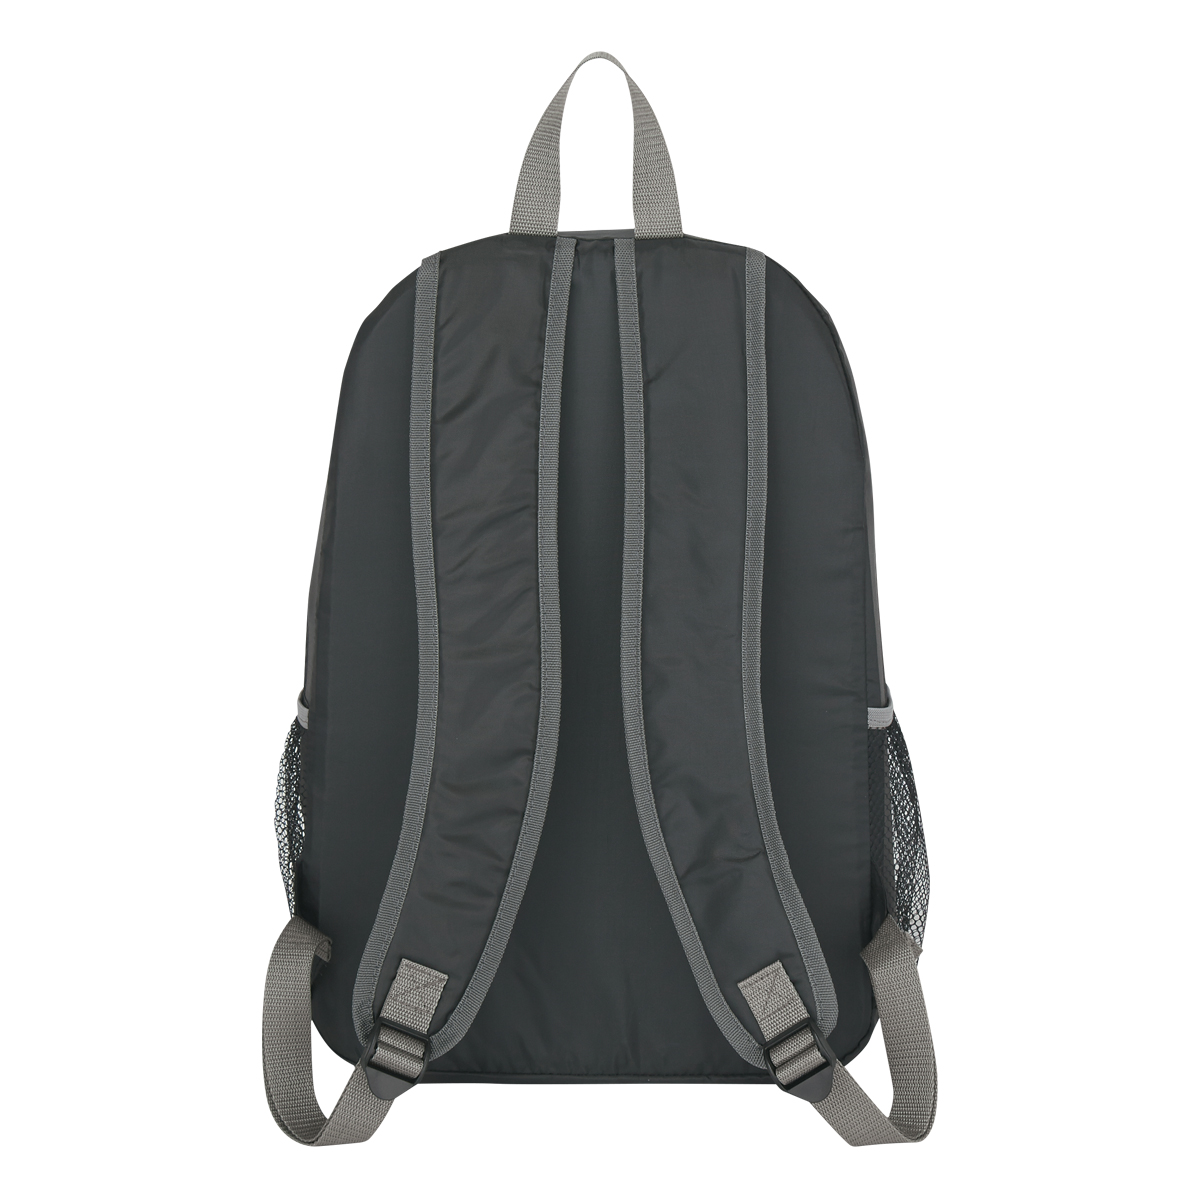 #3027 Sport Backpack - Hit Promotional Products